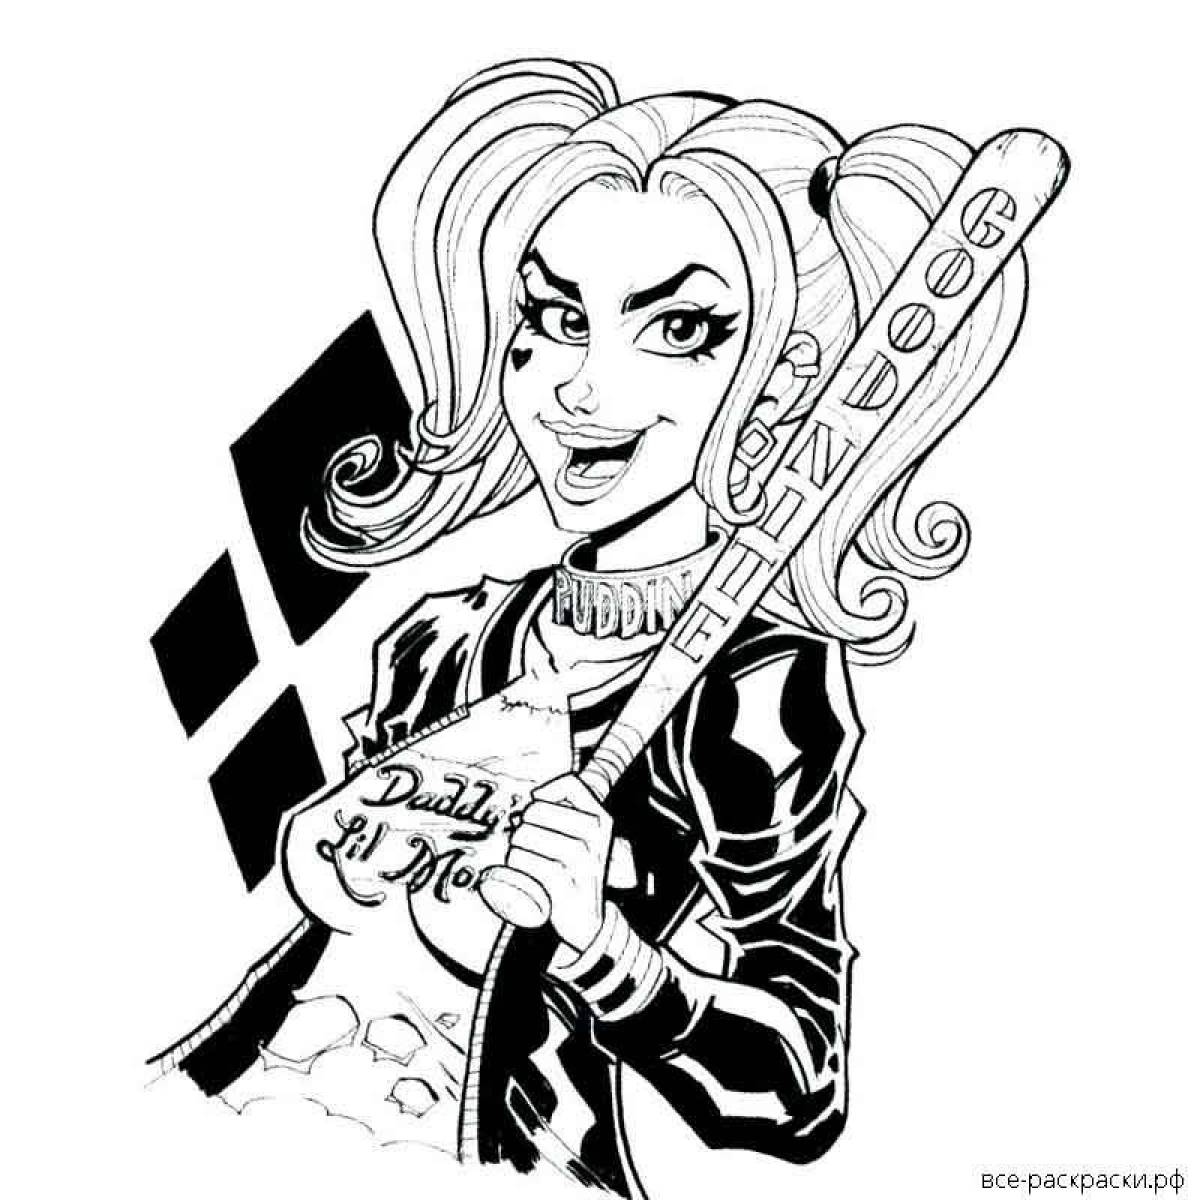 Harley quinn live coloring